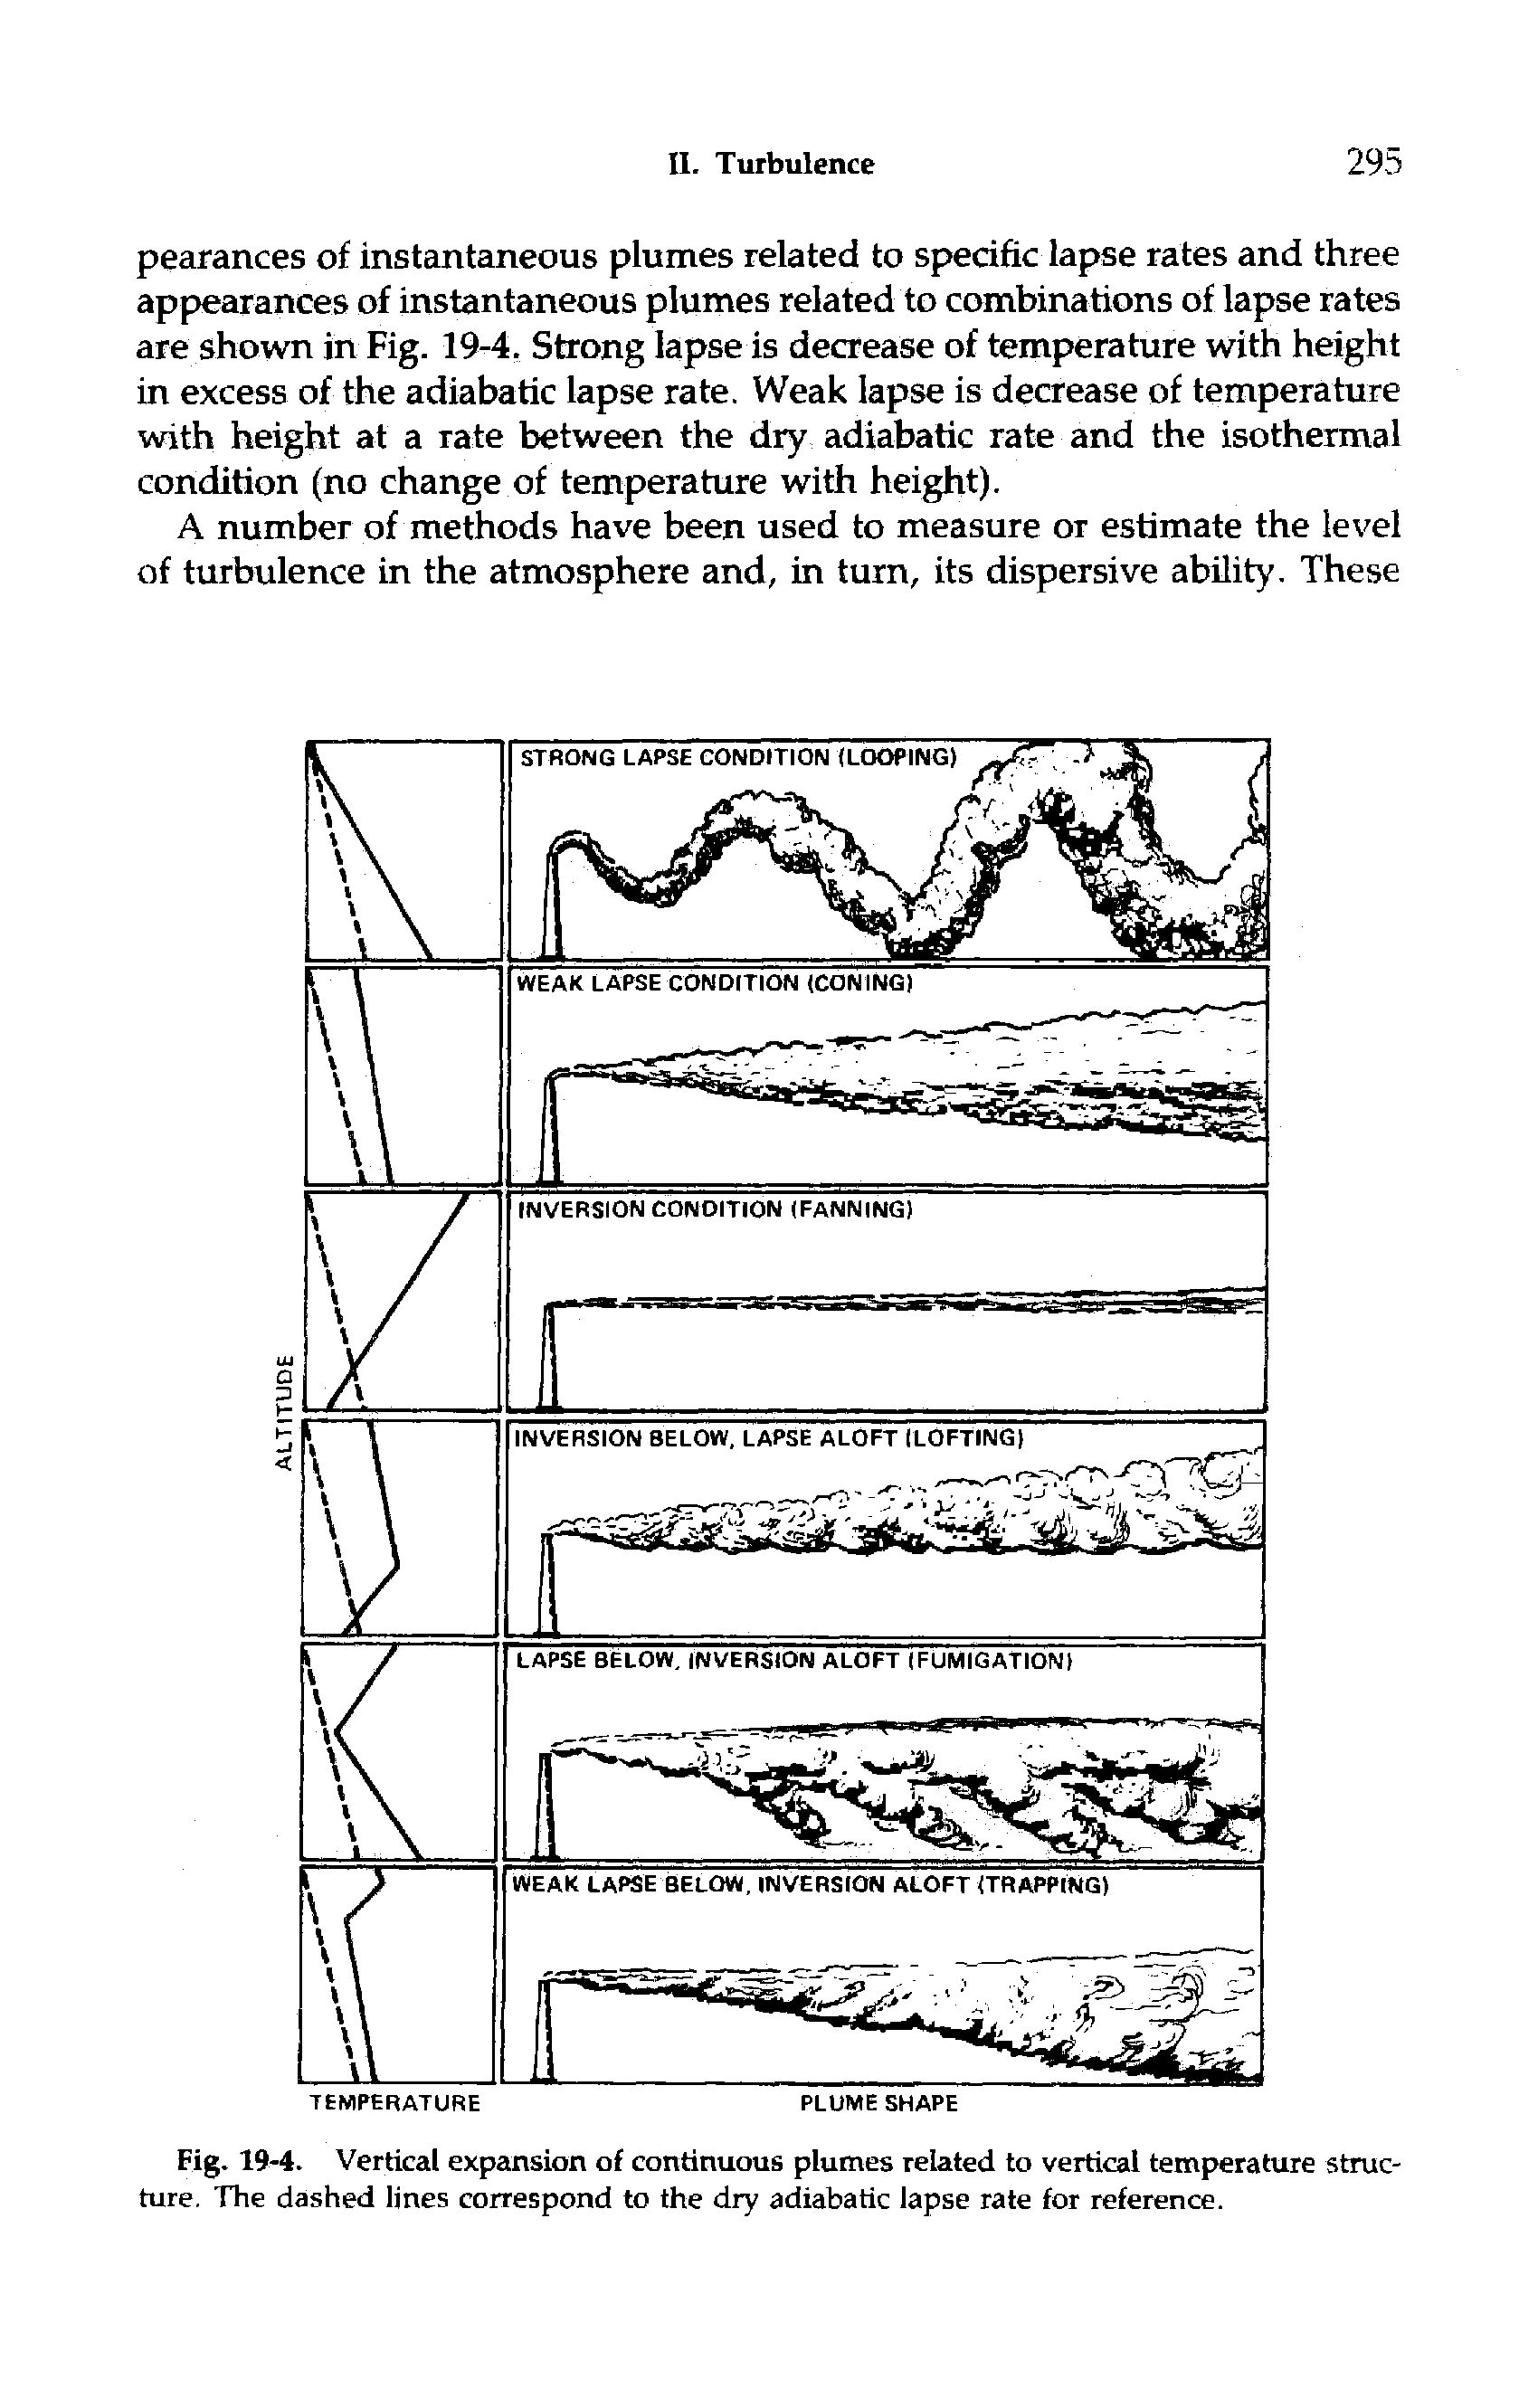 Fig. 19-4. Vertical expansion of continuous plumes related to vertical temperature structure, The dashed lines correspond to the dry adiabatic lapse rate for reference.